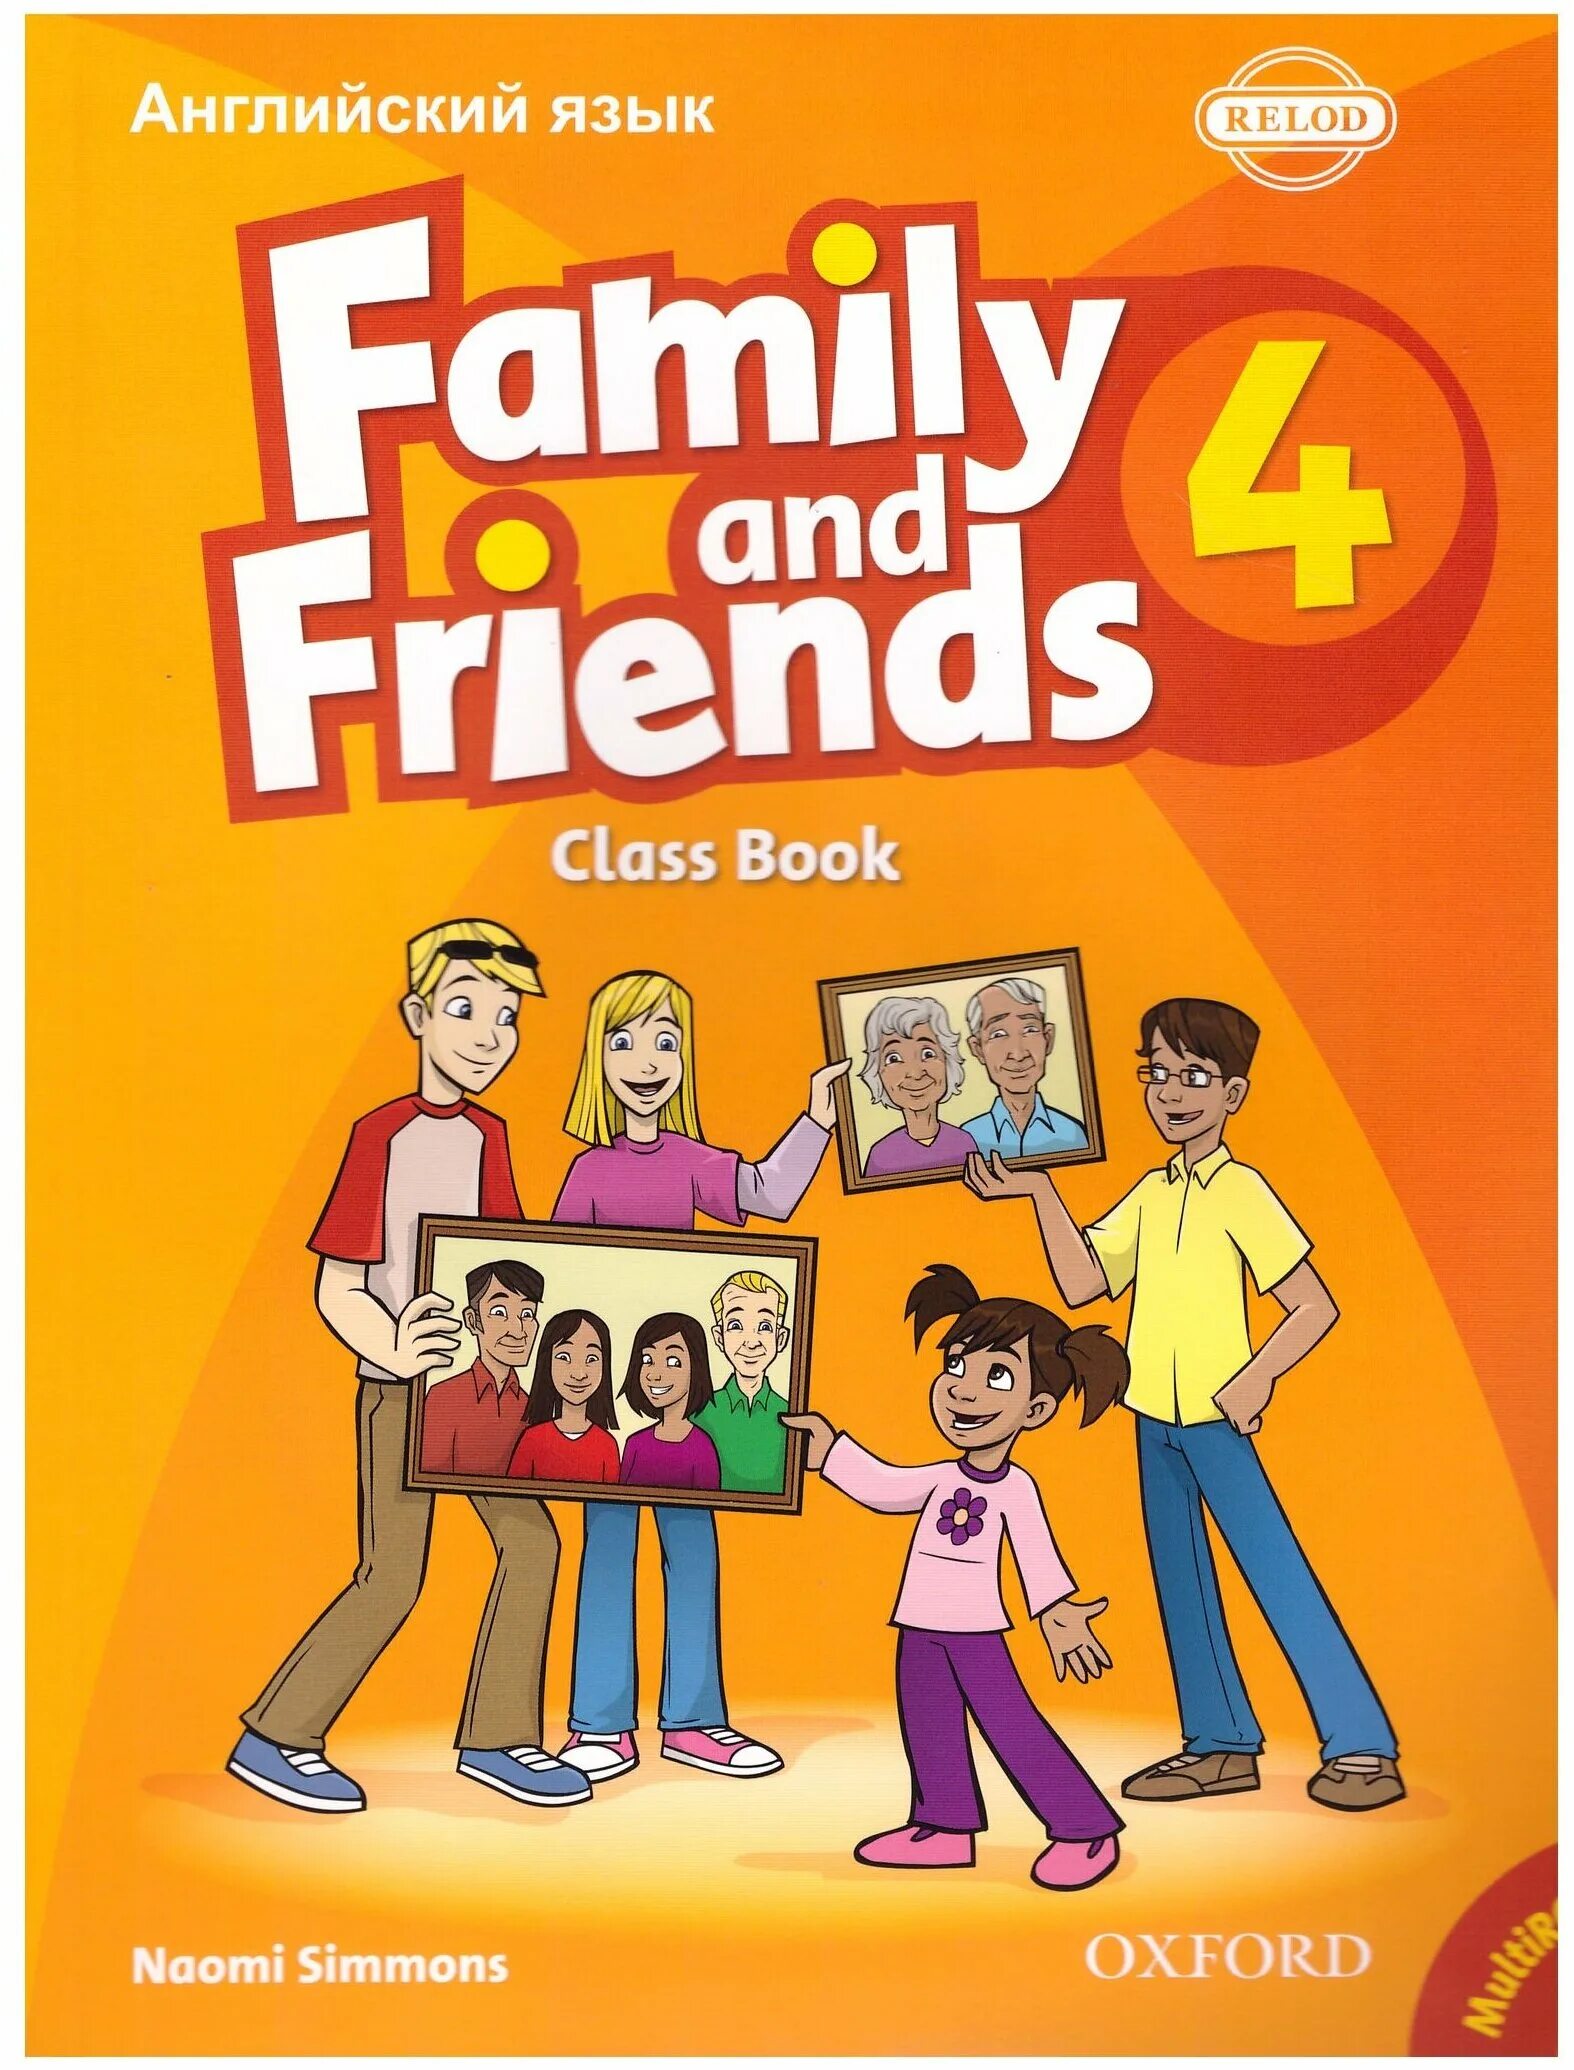 Family and friends students. 4 Класс Family and friends 2 Classbook Workbook. Учебник по английскому языку Family and friends 4. Английский язык Family and friends class book 2. Учебник по английскому языку Family and friends 1.